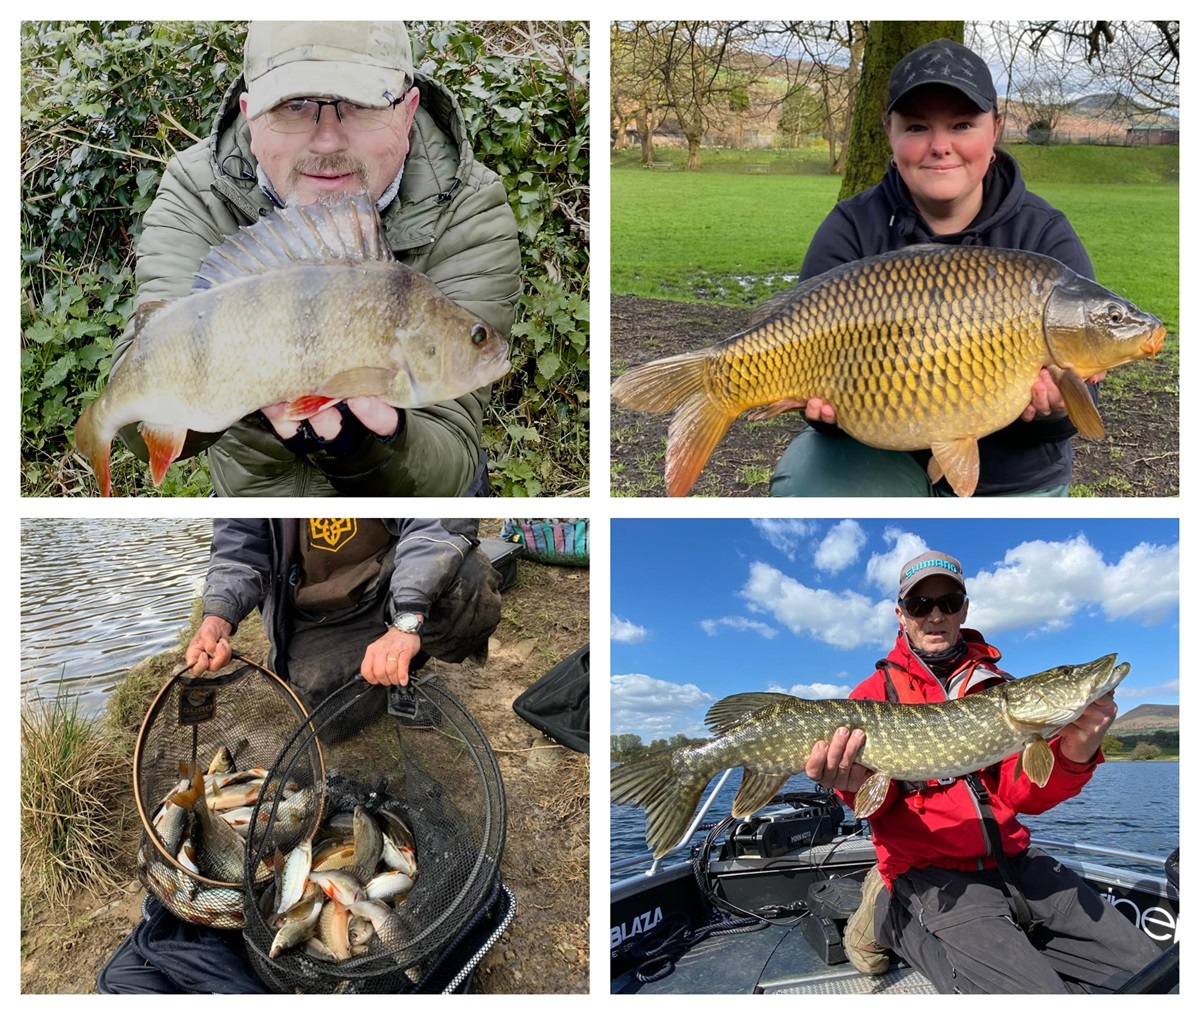 The latest coarse fishing report for Wales is now live on our ‘Fishing in Wales’ site! Check it out here: fishingwales.net/coarse-fishing… #fishinginwales #coarsefishing